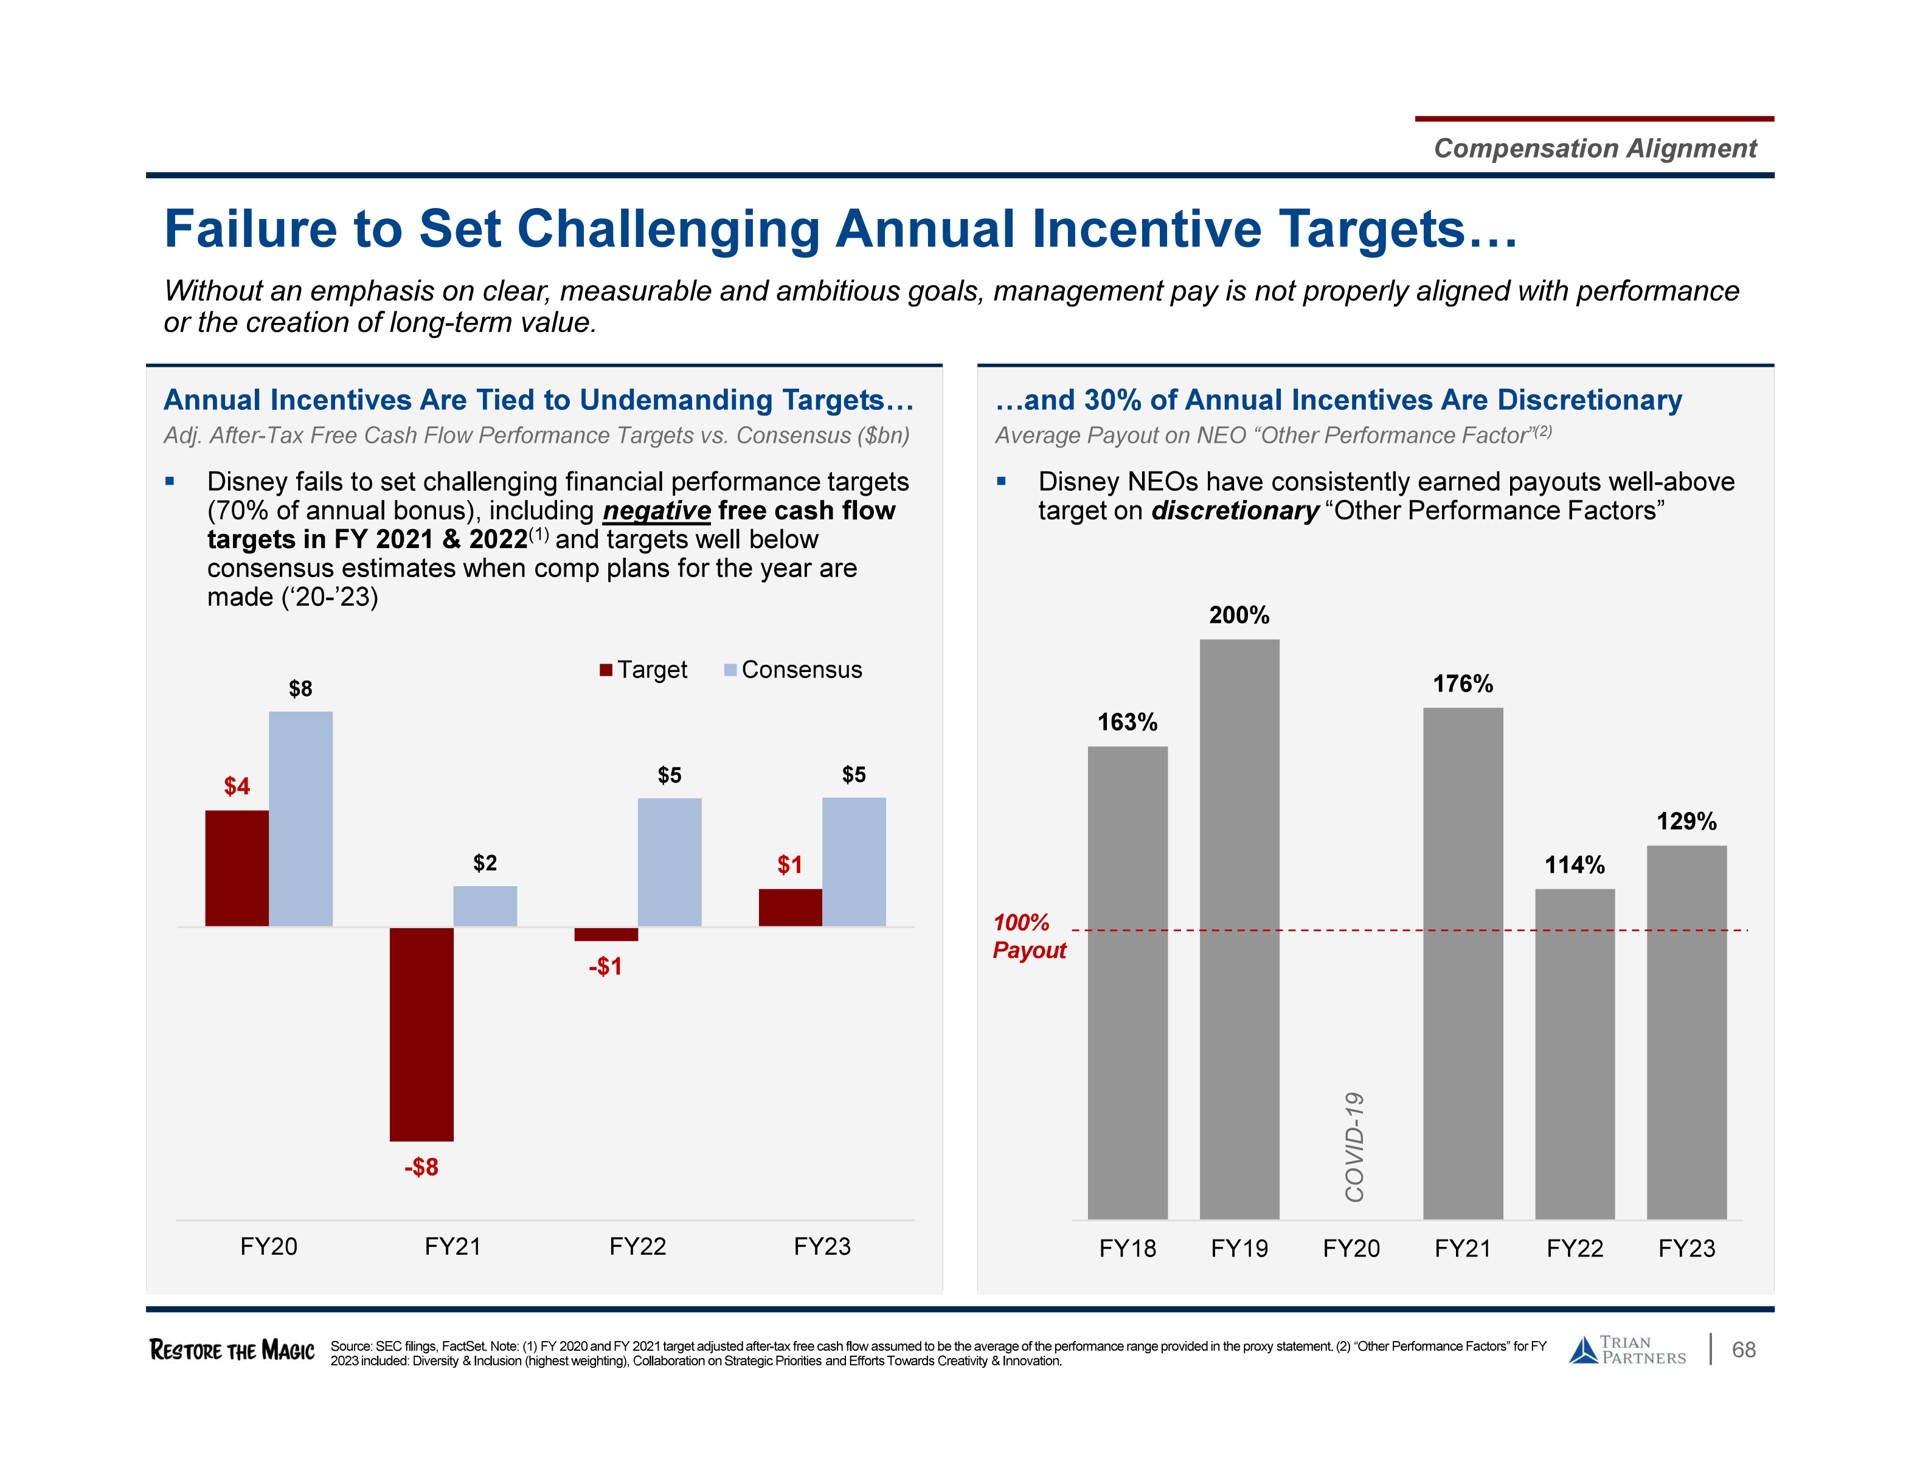 i failure to set challenging annual incentive targets | Trian Partners